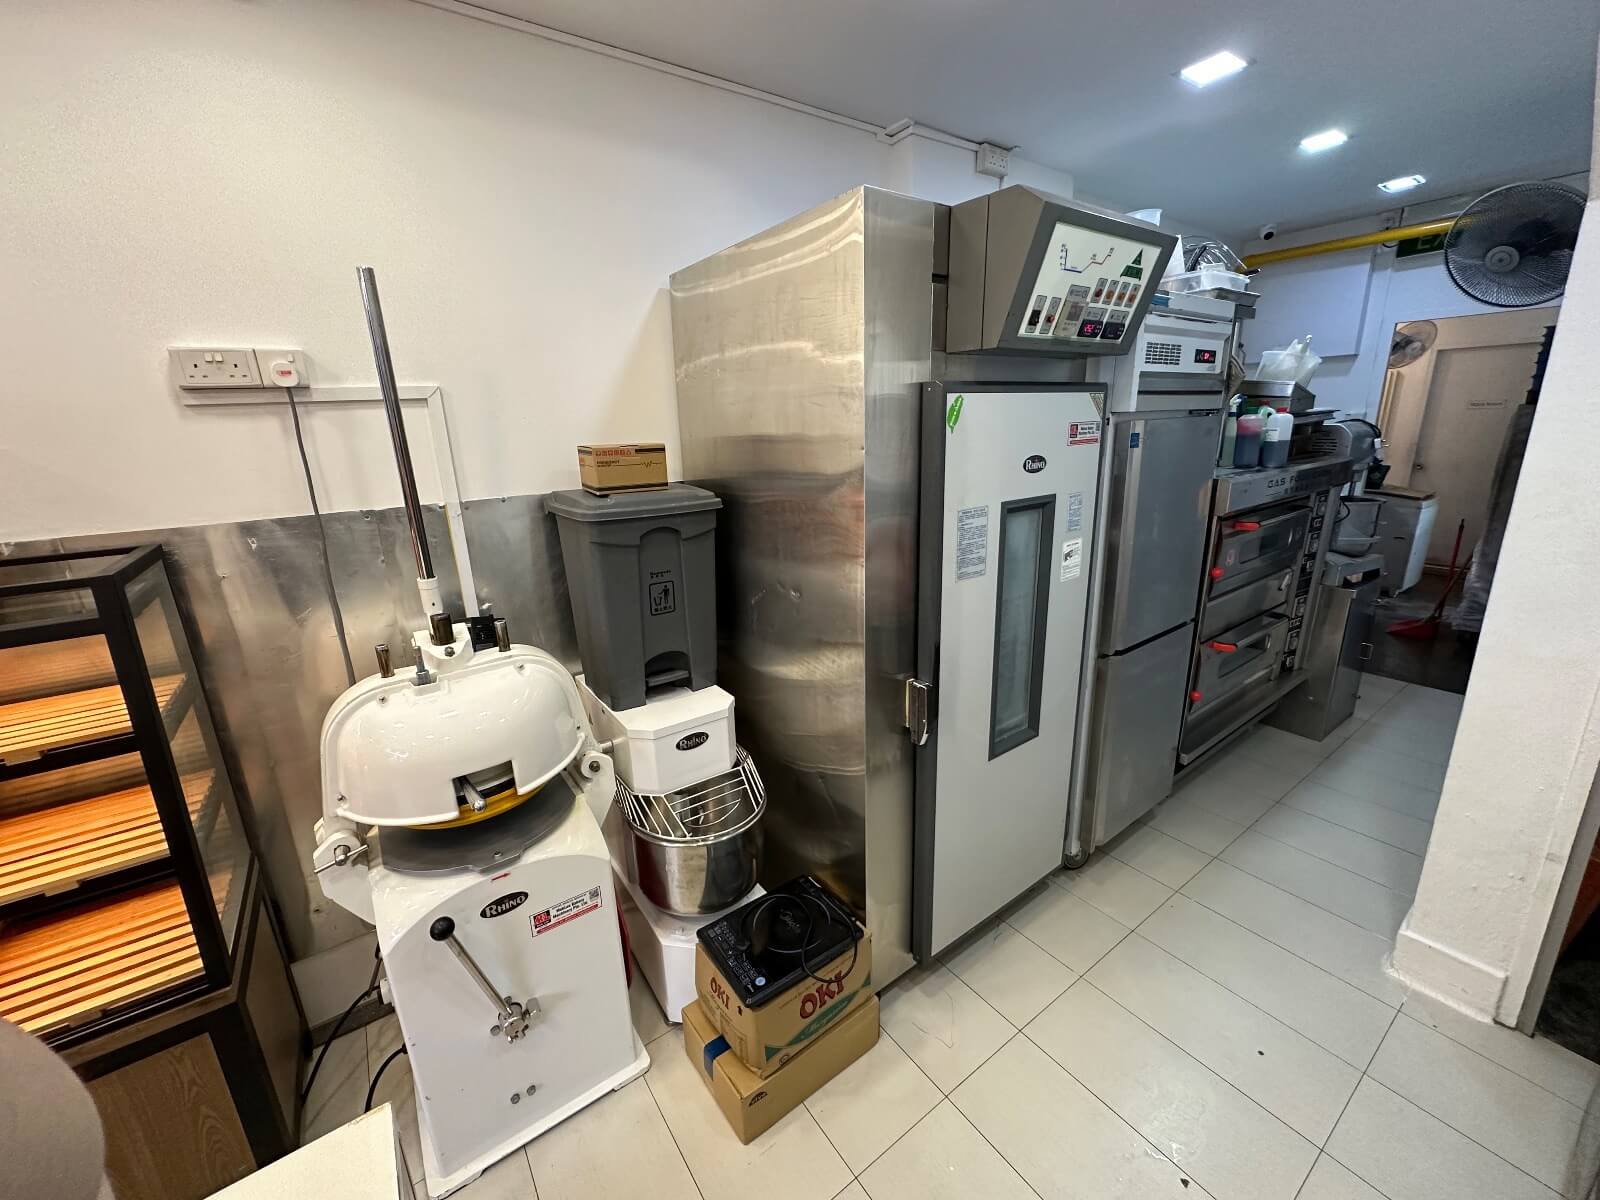 (Expired)Great Opportunity To Own A Bakery With Full Equipment Situated In A Good Location!